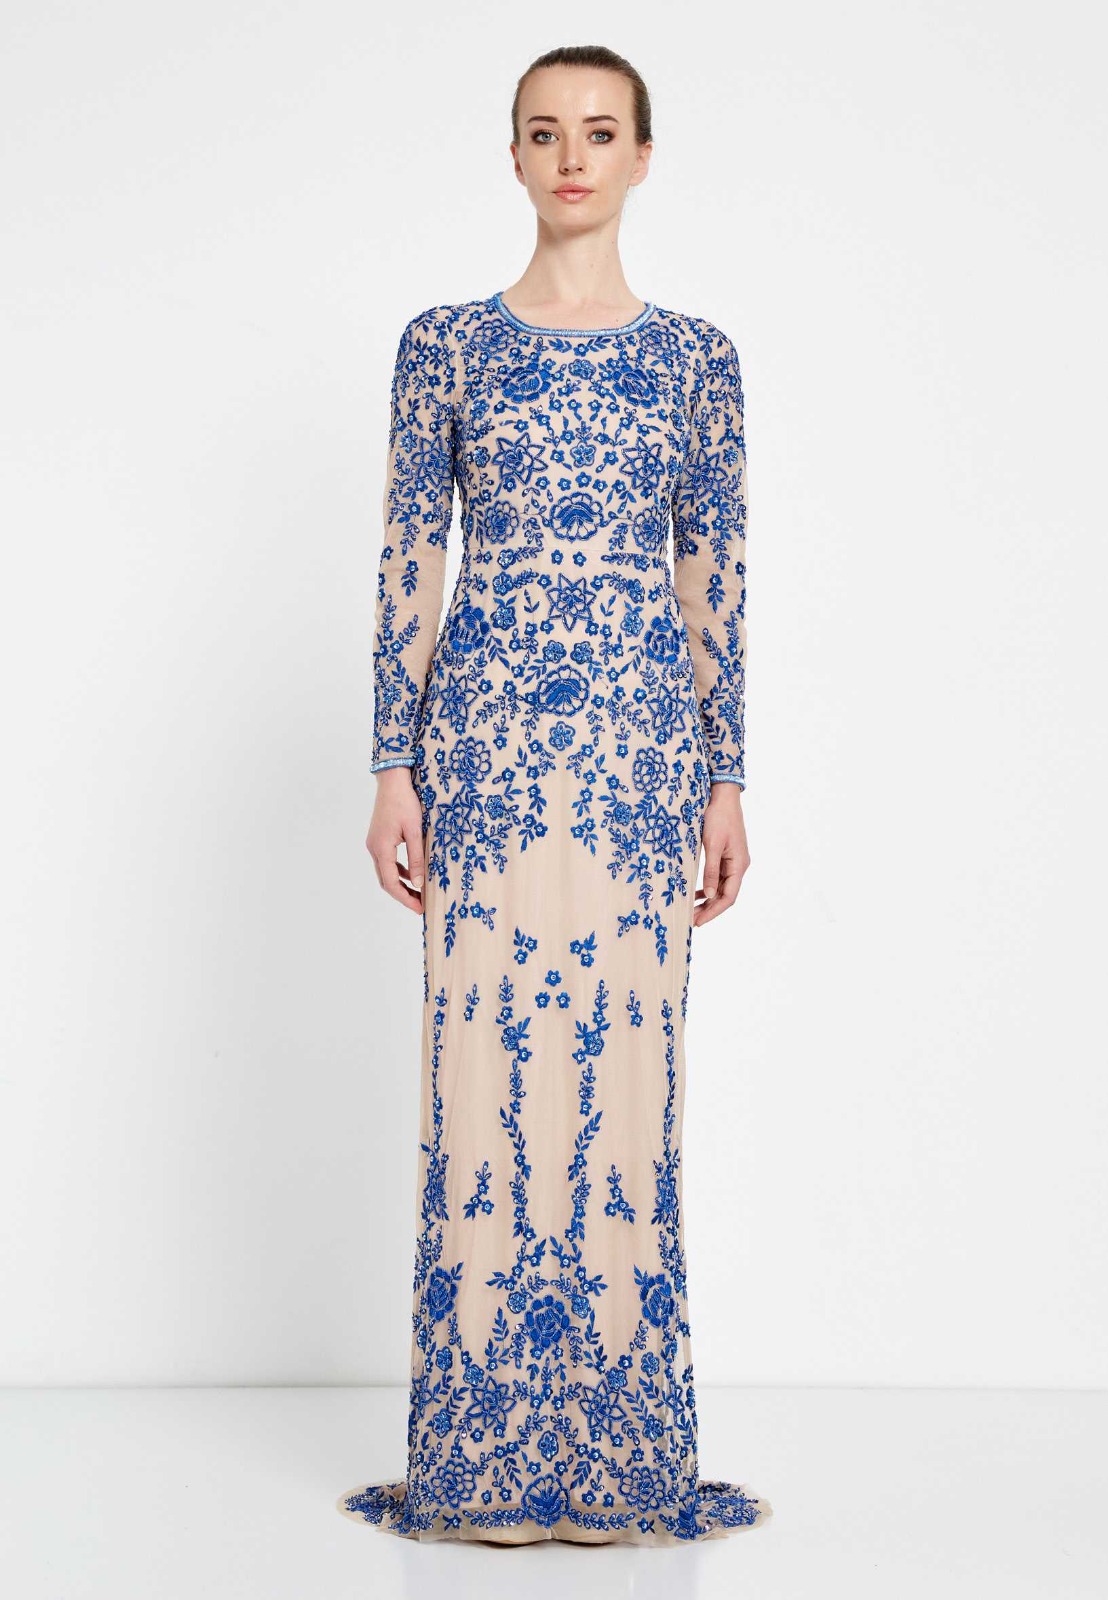 Exclusive Edition occasion dress – Quin Couture